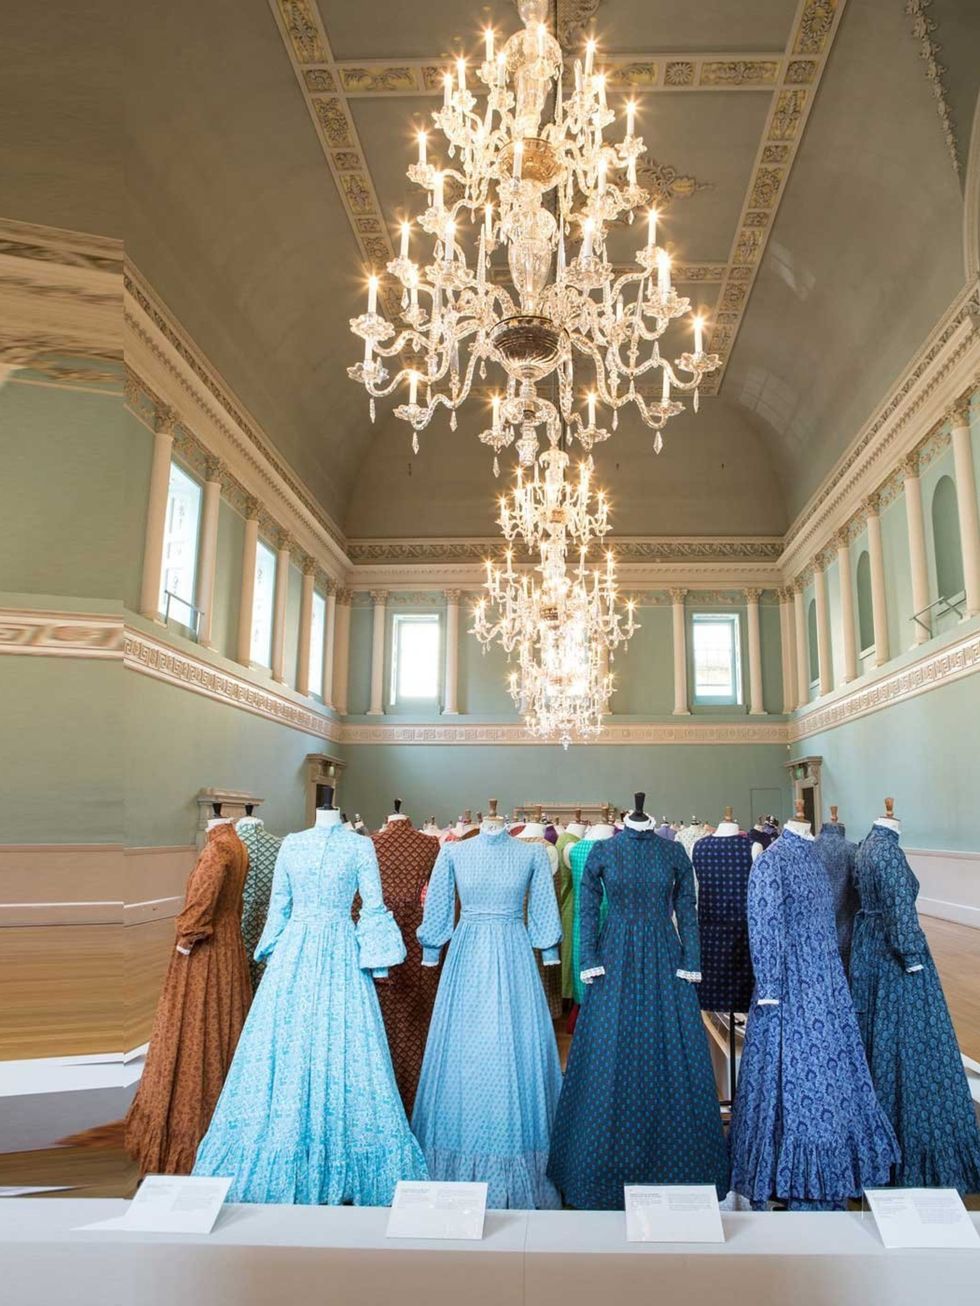 <p><strong>Laura Ashley: The Romantic Heroine</strong></p><p>Dont miss out on your last chance to catch <em>Laura Ashley: The Romantic Heroine</em> at the Baths Fashion Museum, the first major retrospective to be staged in honour of the designer whose f